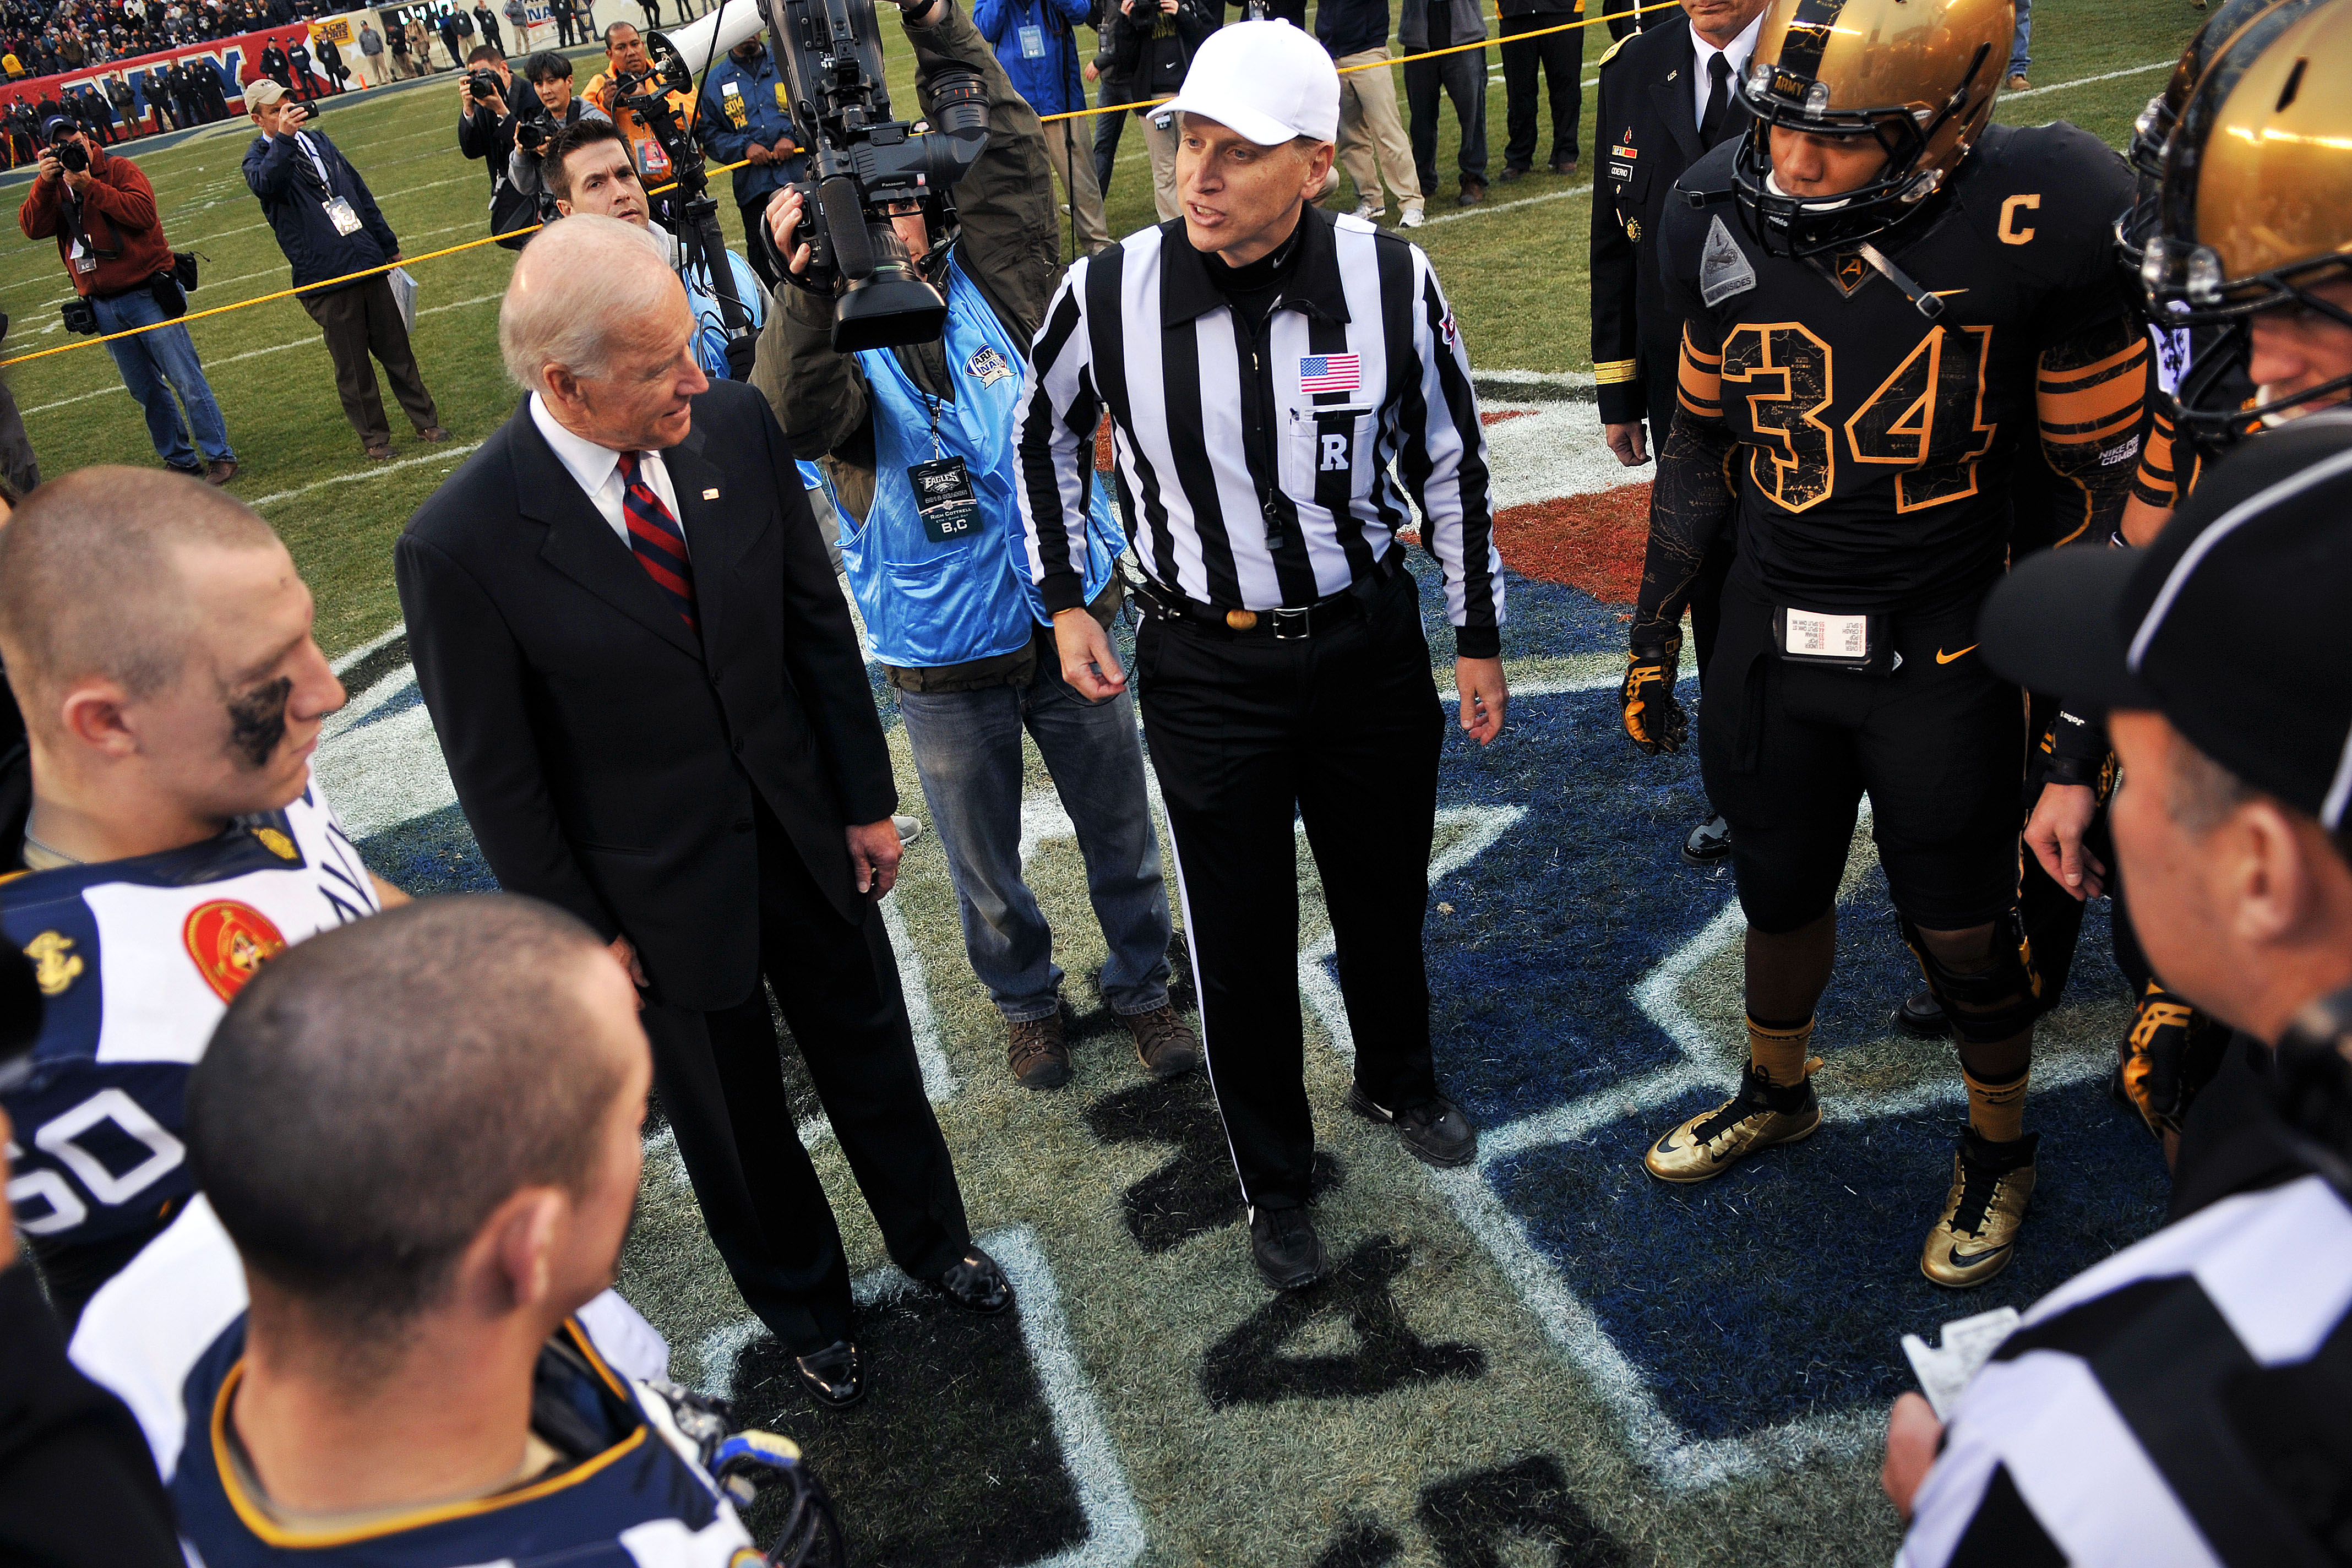 vice-president-joseph-biden-observes-the-coin-toss-for-the-army-navy-football-game-at-lincoln